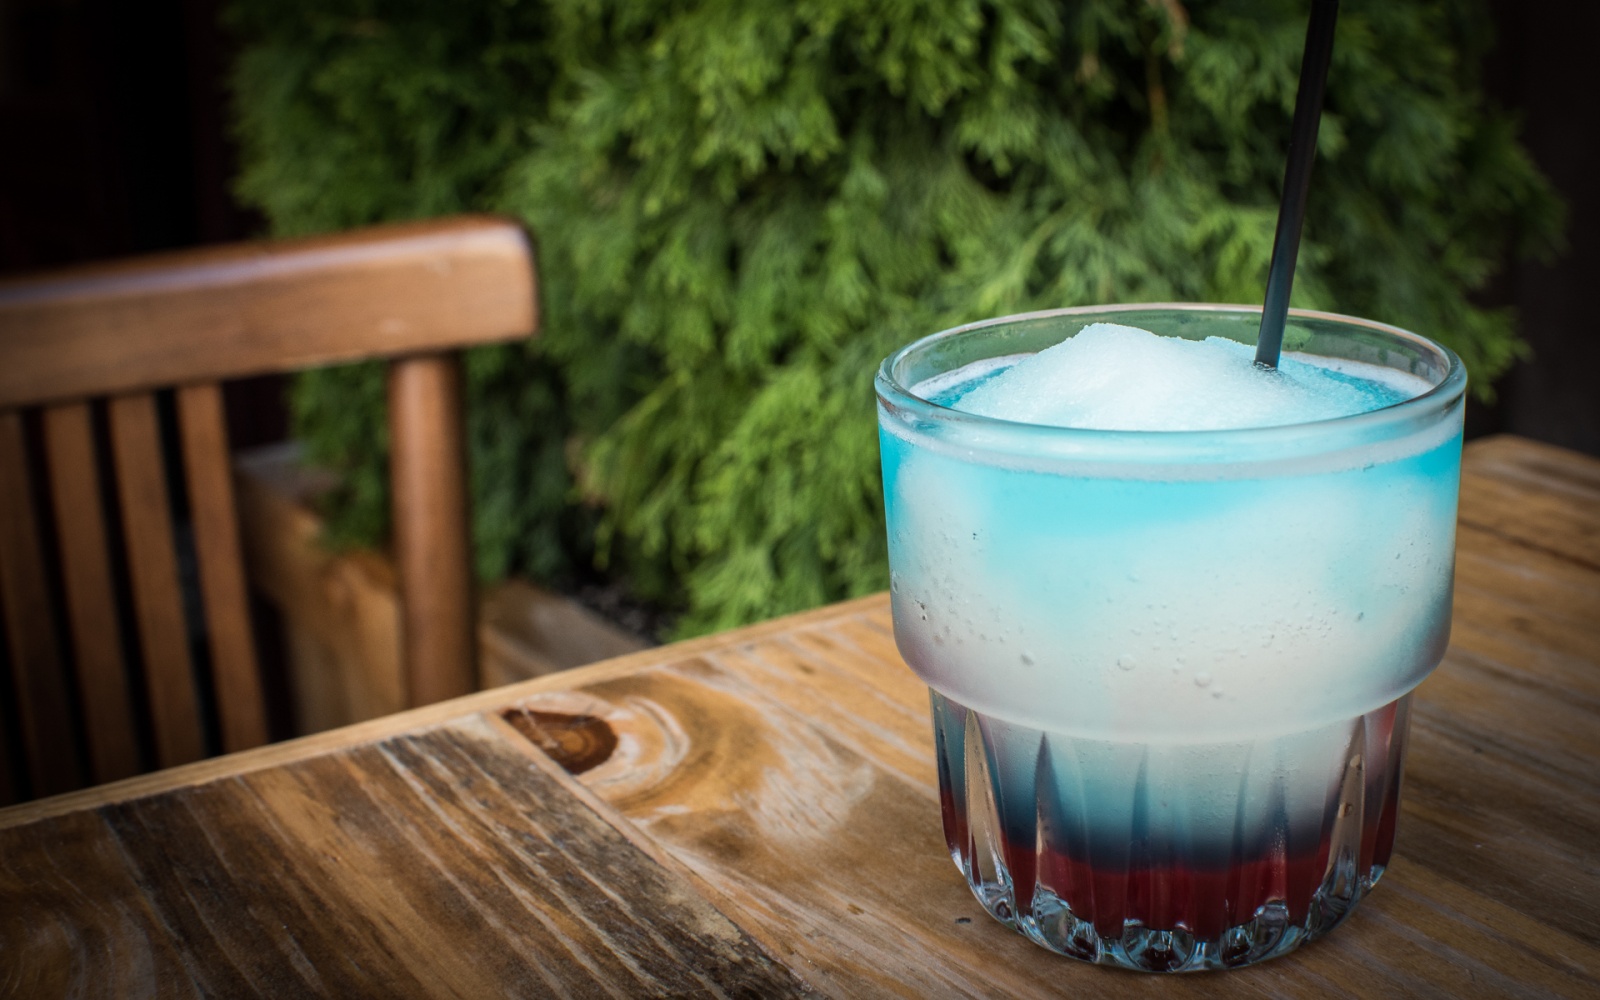 This July 4-Themed Cocktail is Everything We Love About Summer